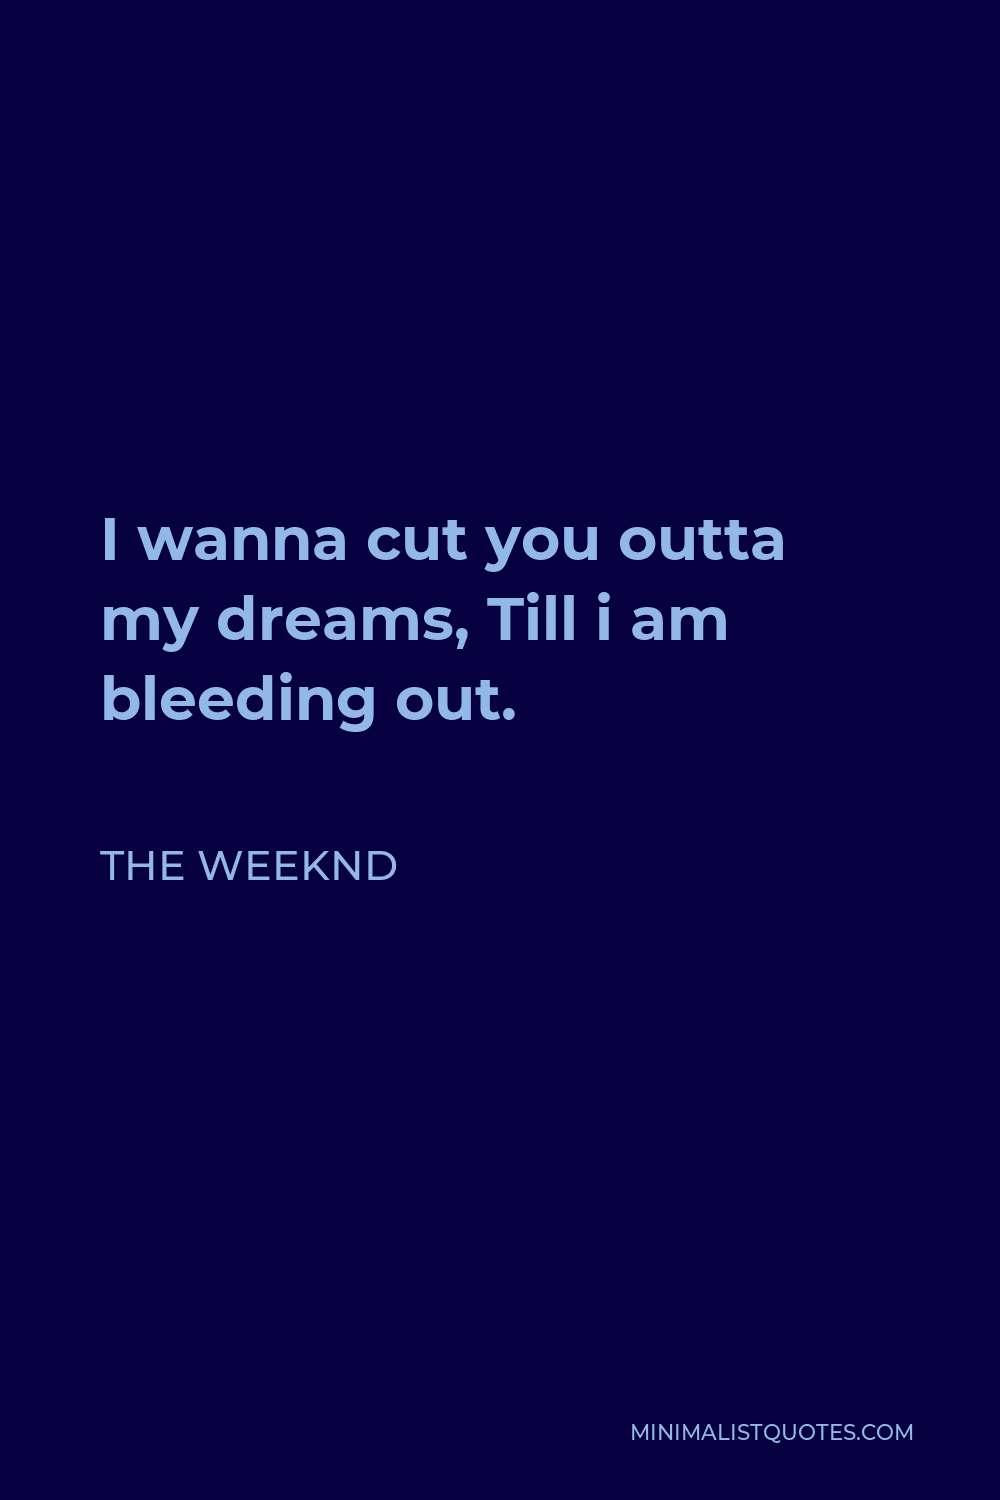 The Weeknd Quote - I wanna cut you outta my dreams, Till i am bleeding out.